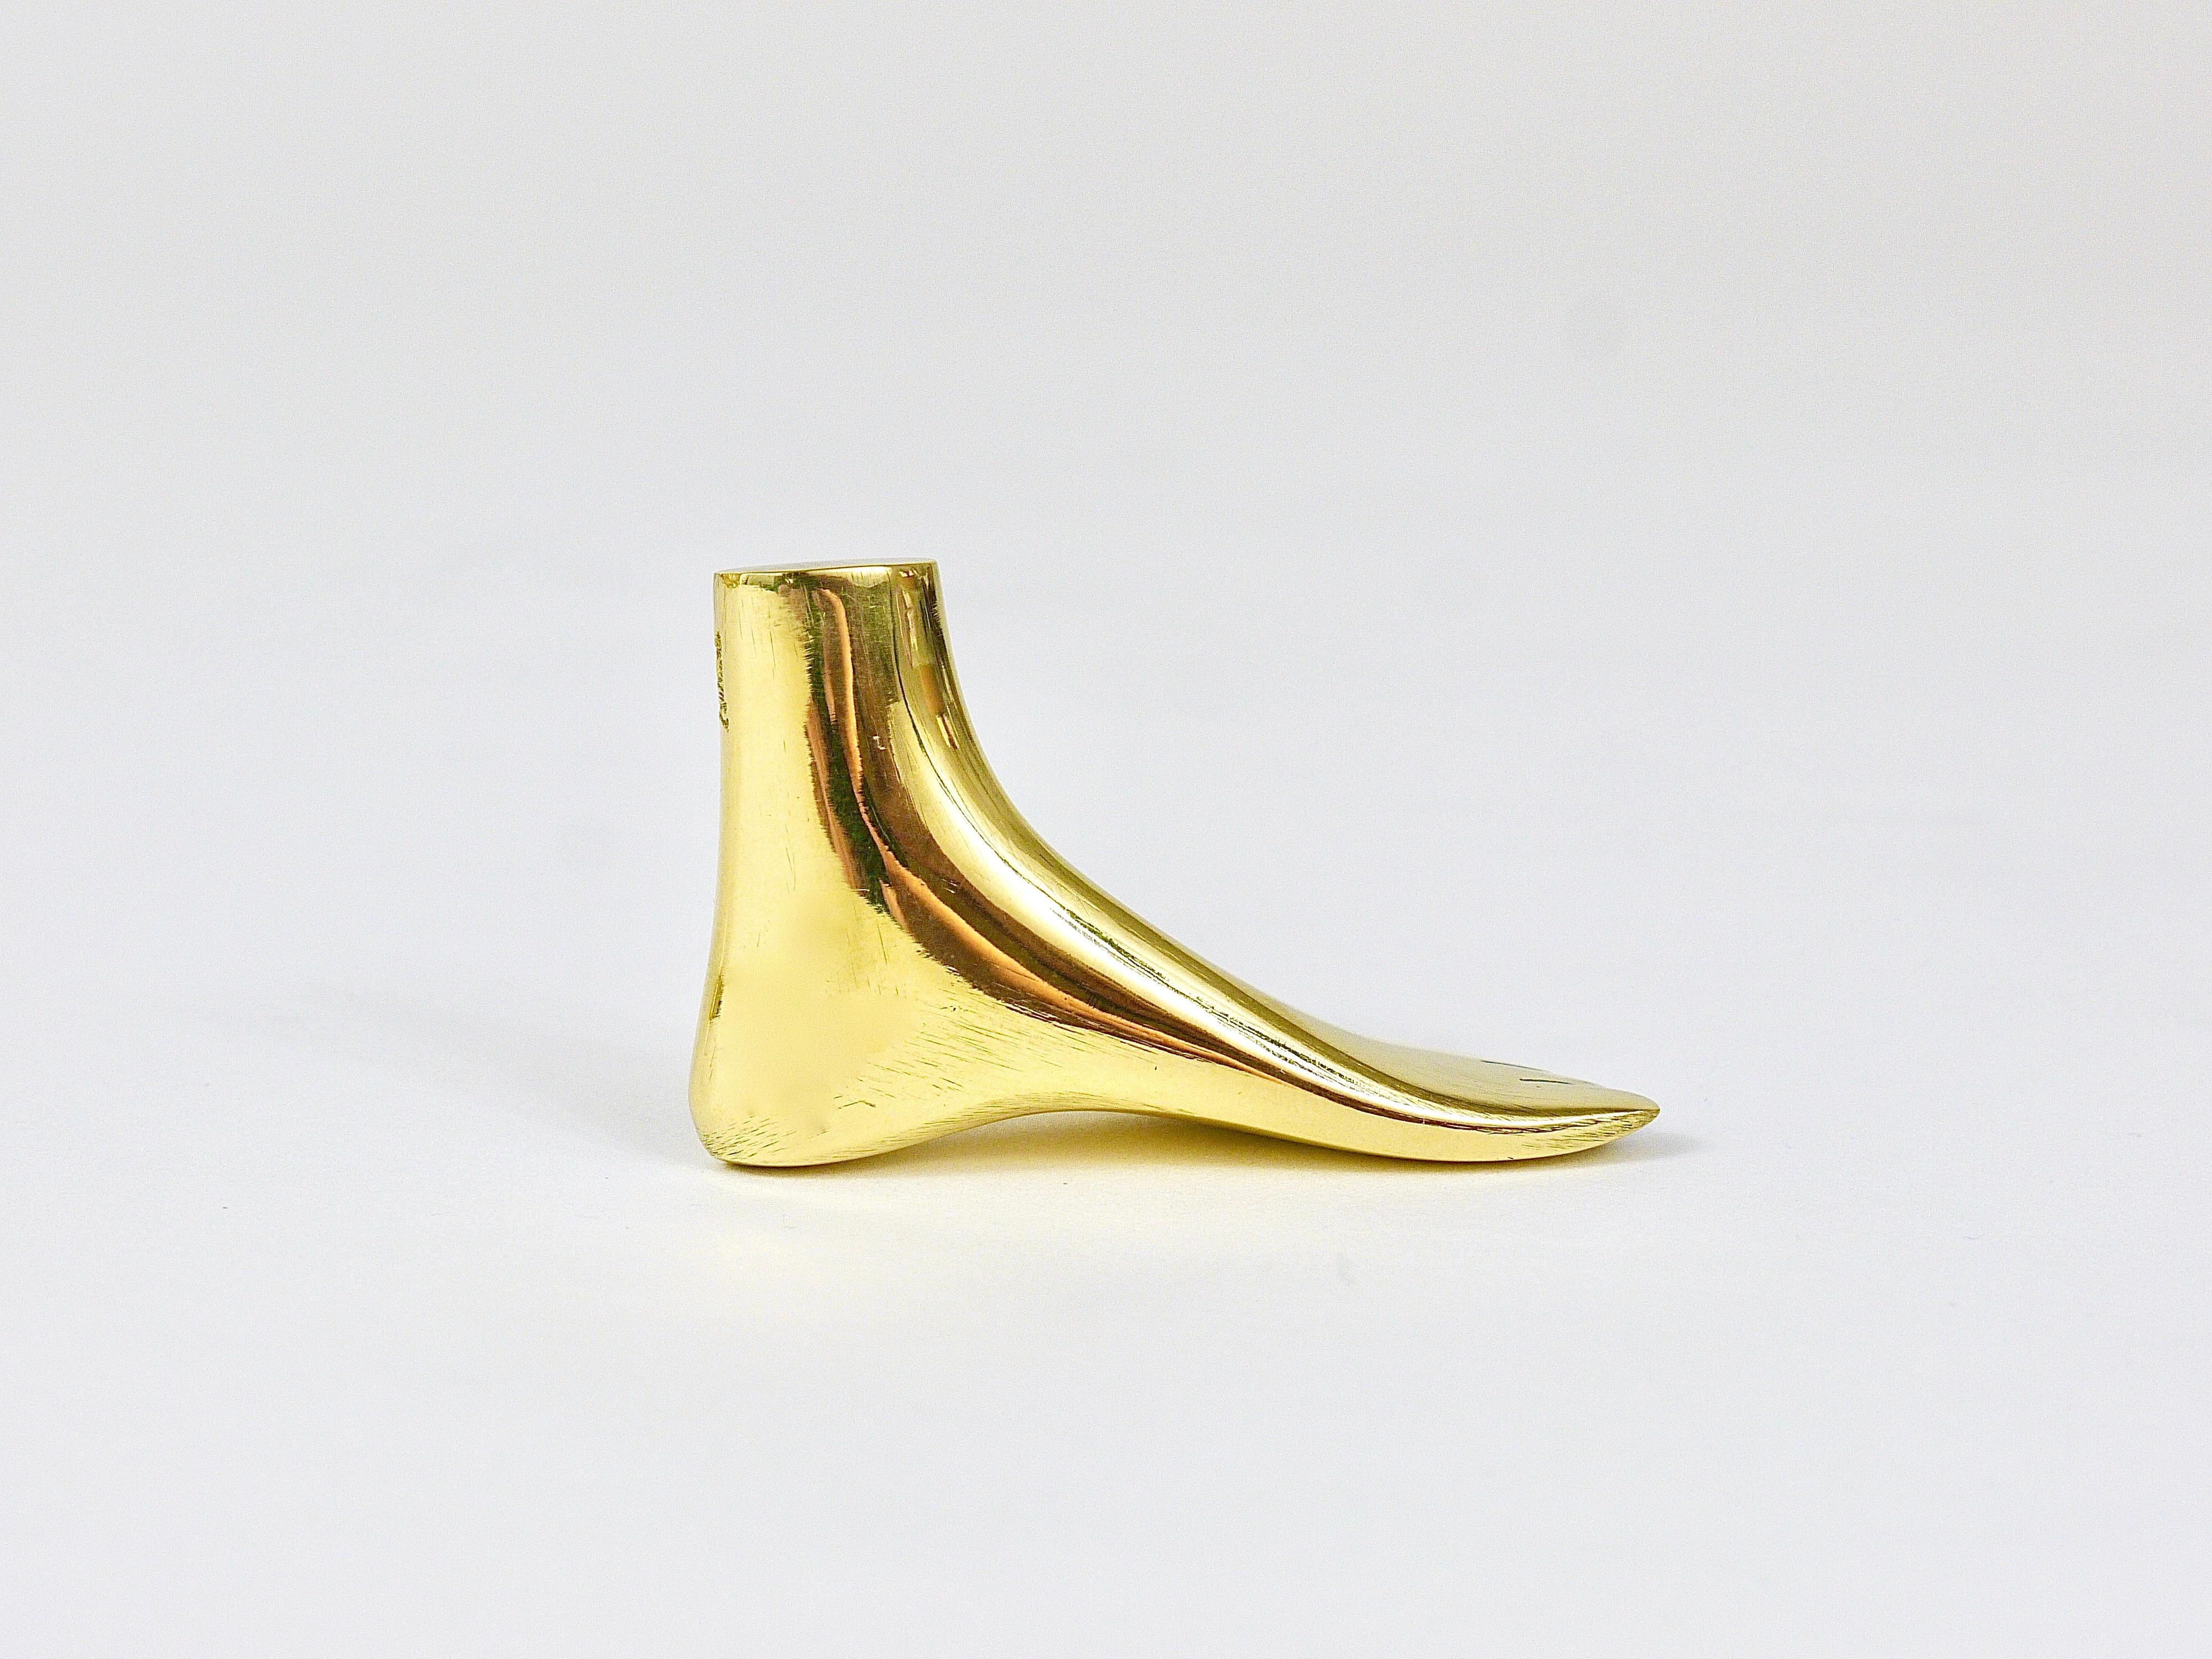 Polished Signed Carl Auböck Midcentury Brass Foot Paperweight Handmade Sculpture For Sale